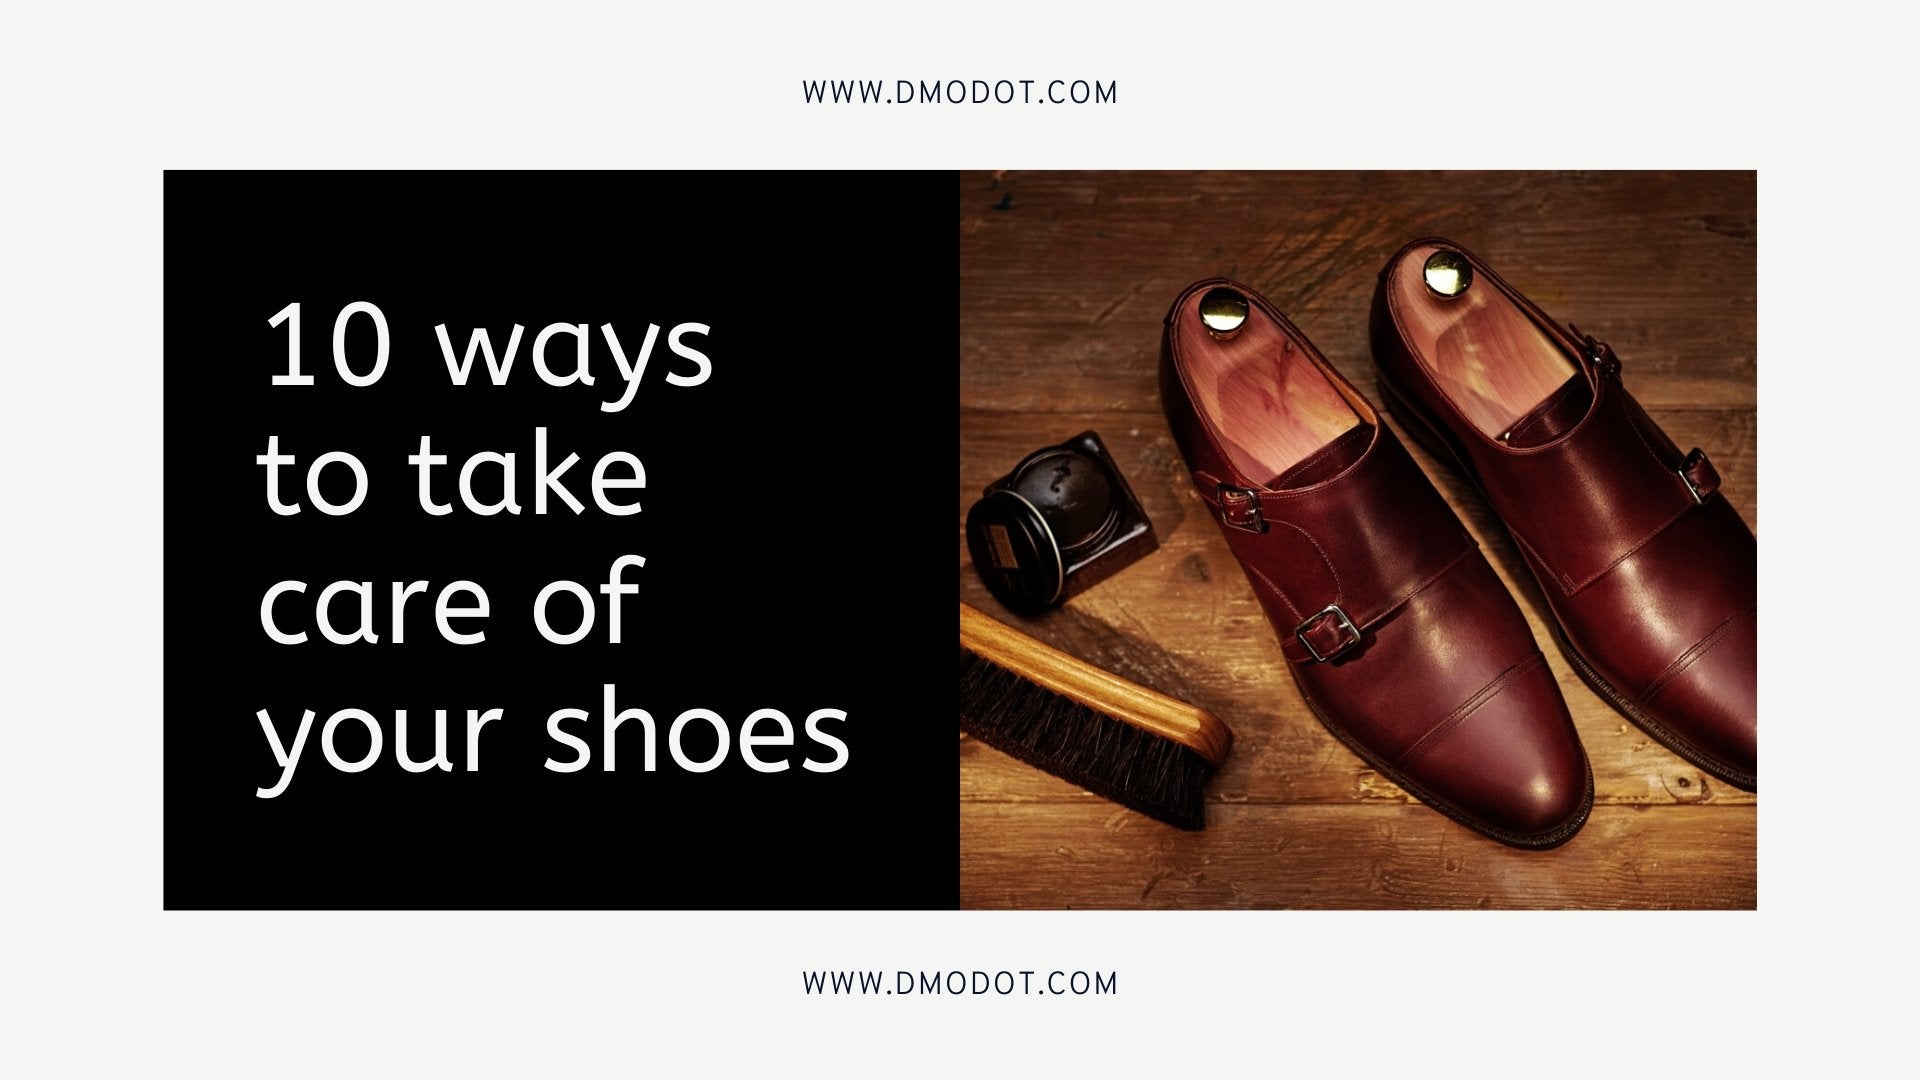 10 Ways to Take Care of your Shoes